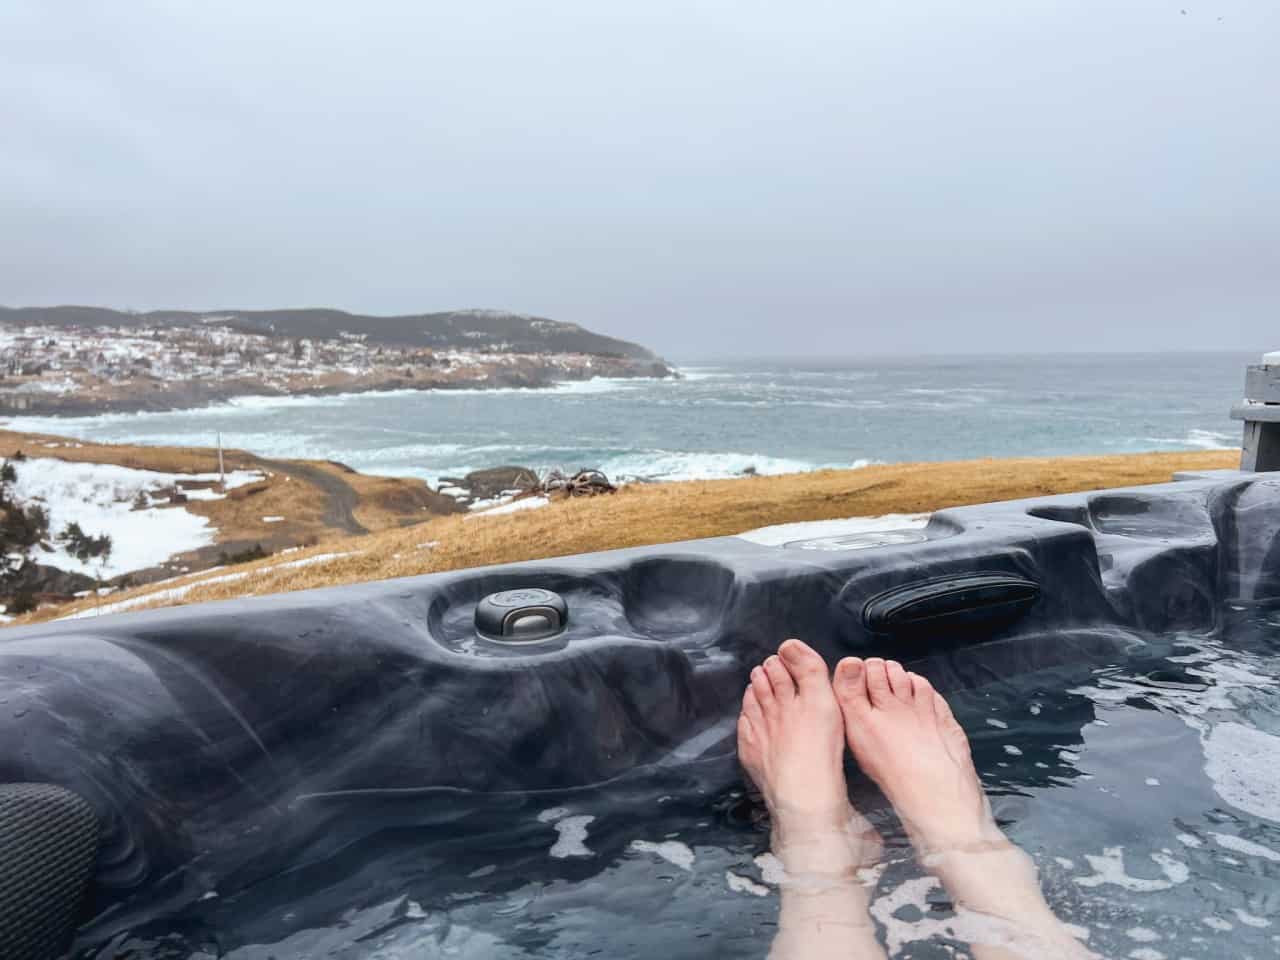 Hot Tub With Ocean View in Pouch Cove Newfoundland Canada  - Hot tubbing with an sing views of the rugged Newfoundland and Labrador coastline is a bucket list activity while visiting the island.  Feel the salty icy wind from the North Atlantic Ocean while you wave watch from the comfort of a luxury spa pool. 